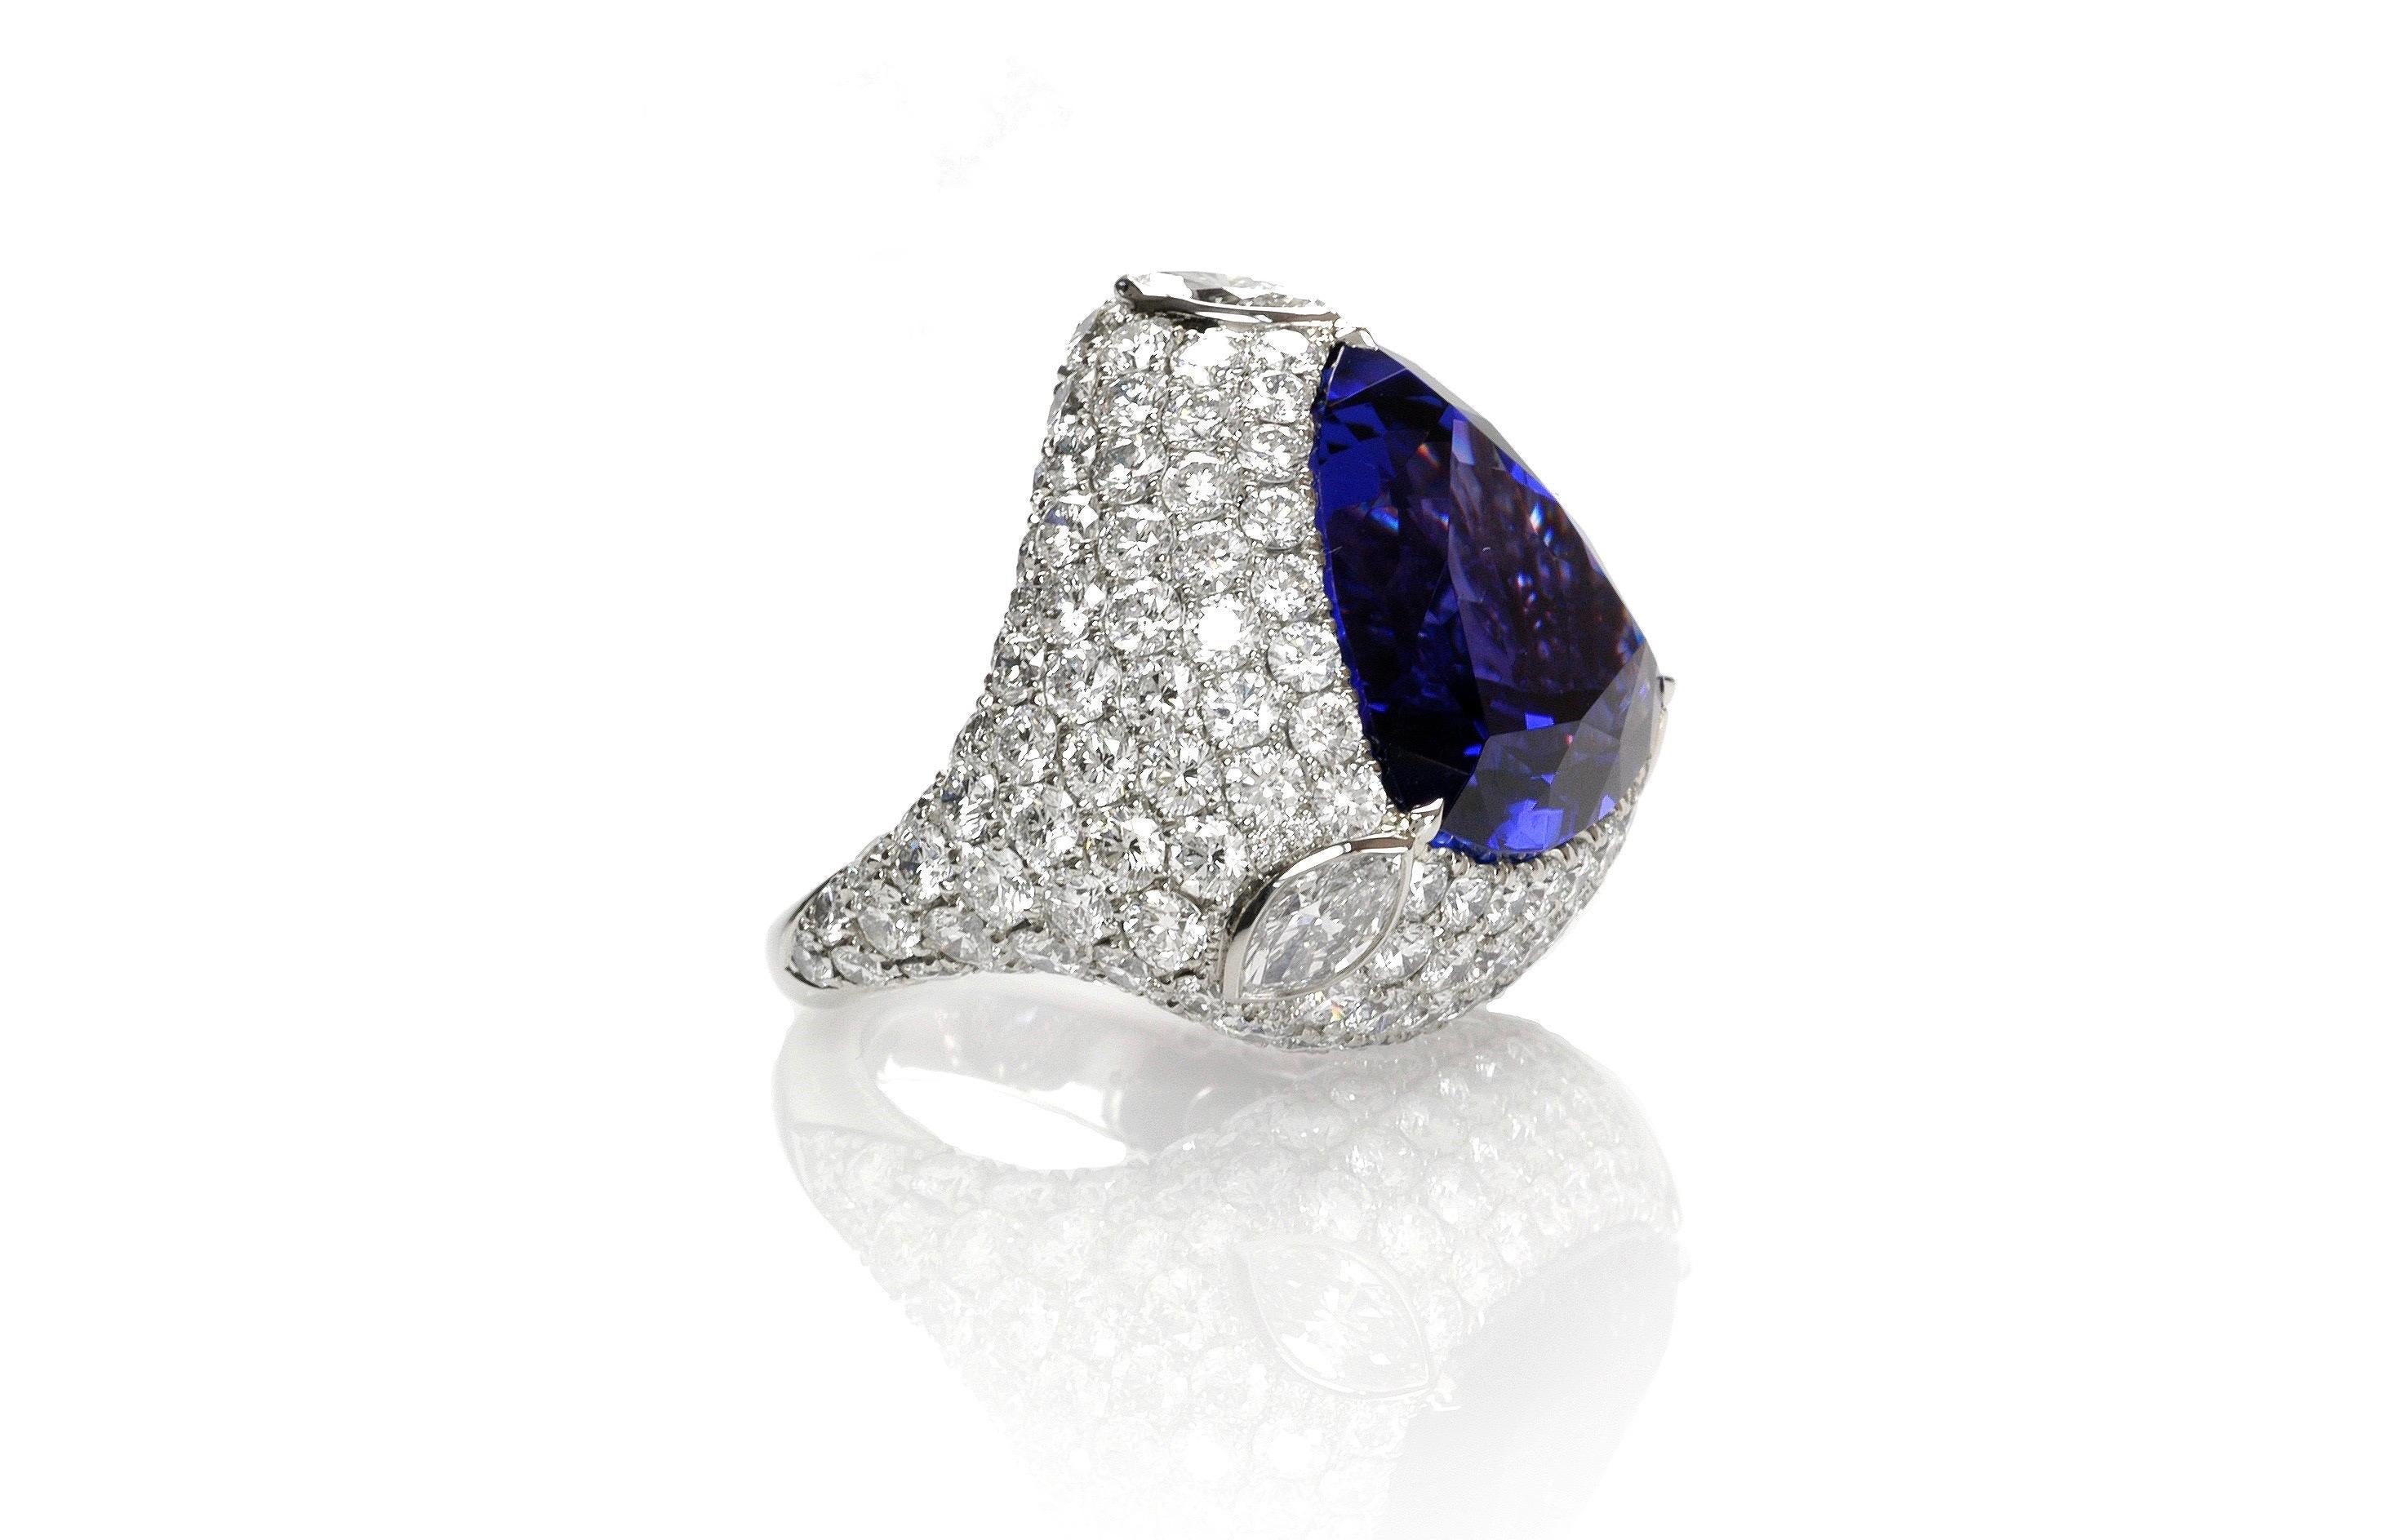 Contemporary design and superior craftsmanship are combined in this impressive ring.  From stone selection to cutting and setting, everything is first rate and it shows.

1  tanzanite 28.38cts
3 marquise cut diamonds total weight 1.14cts
163 round